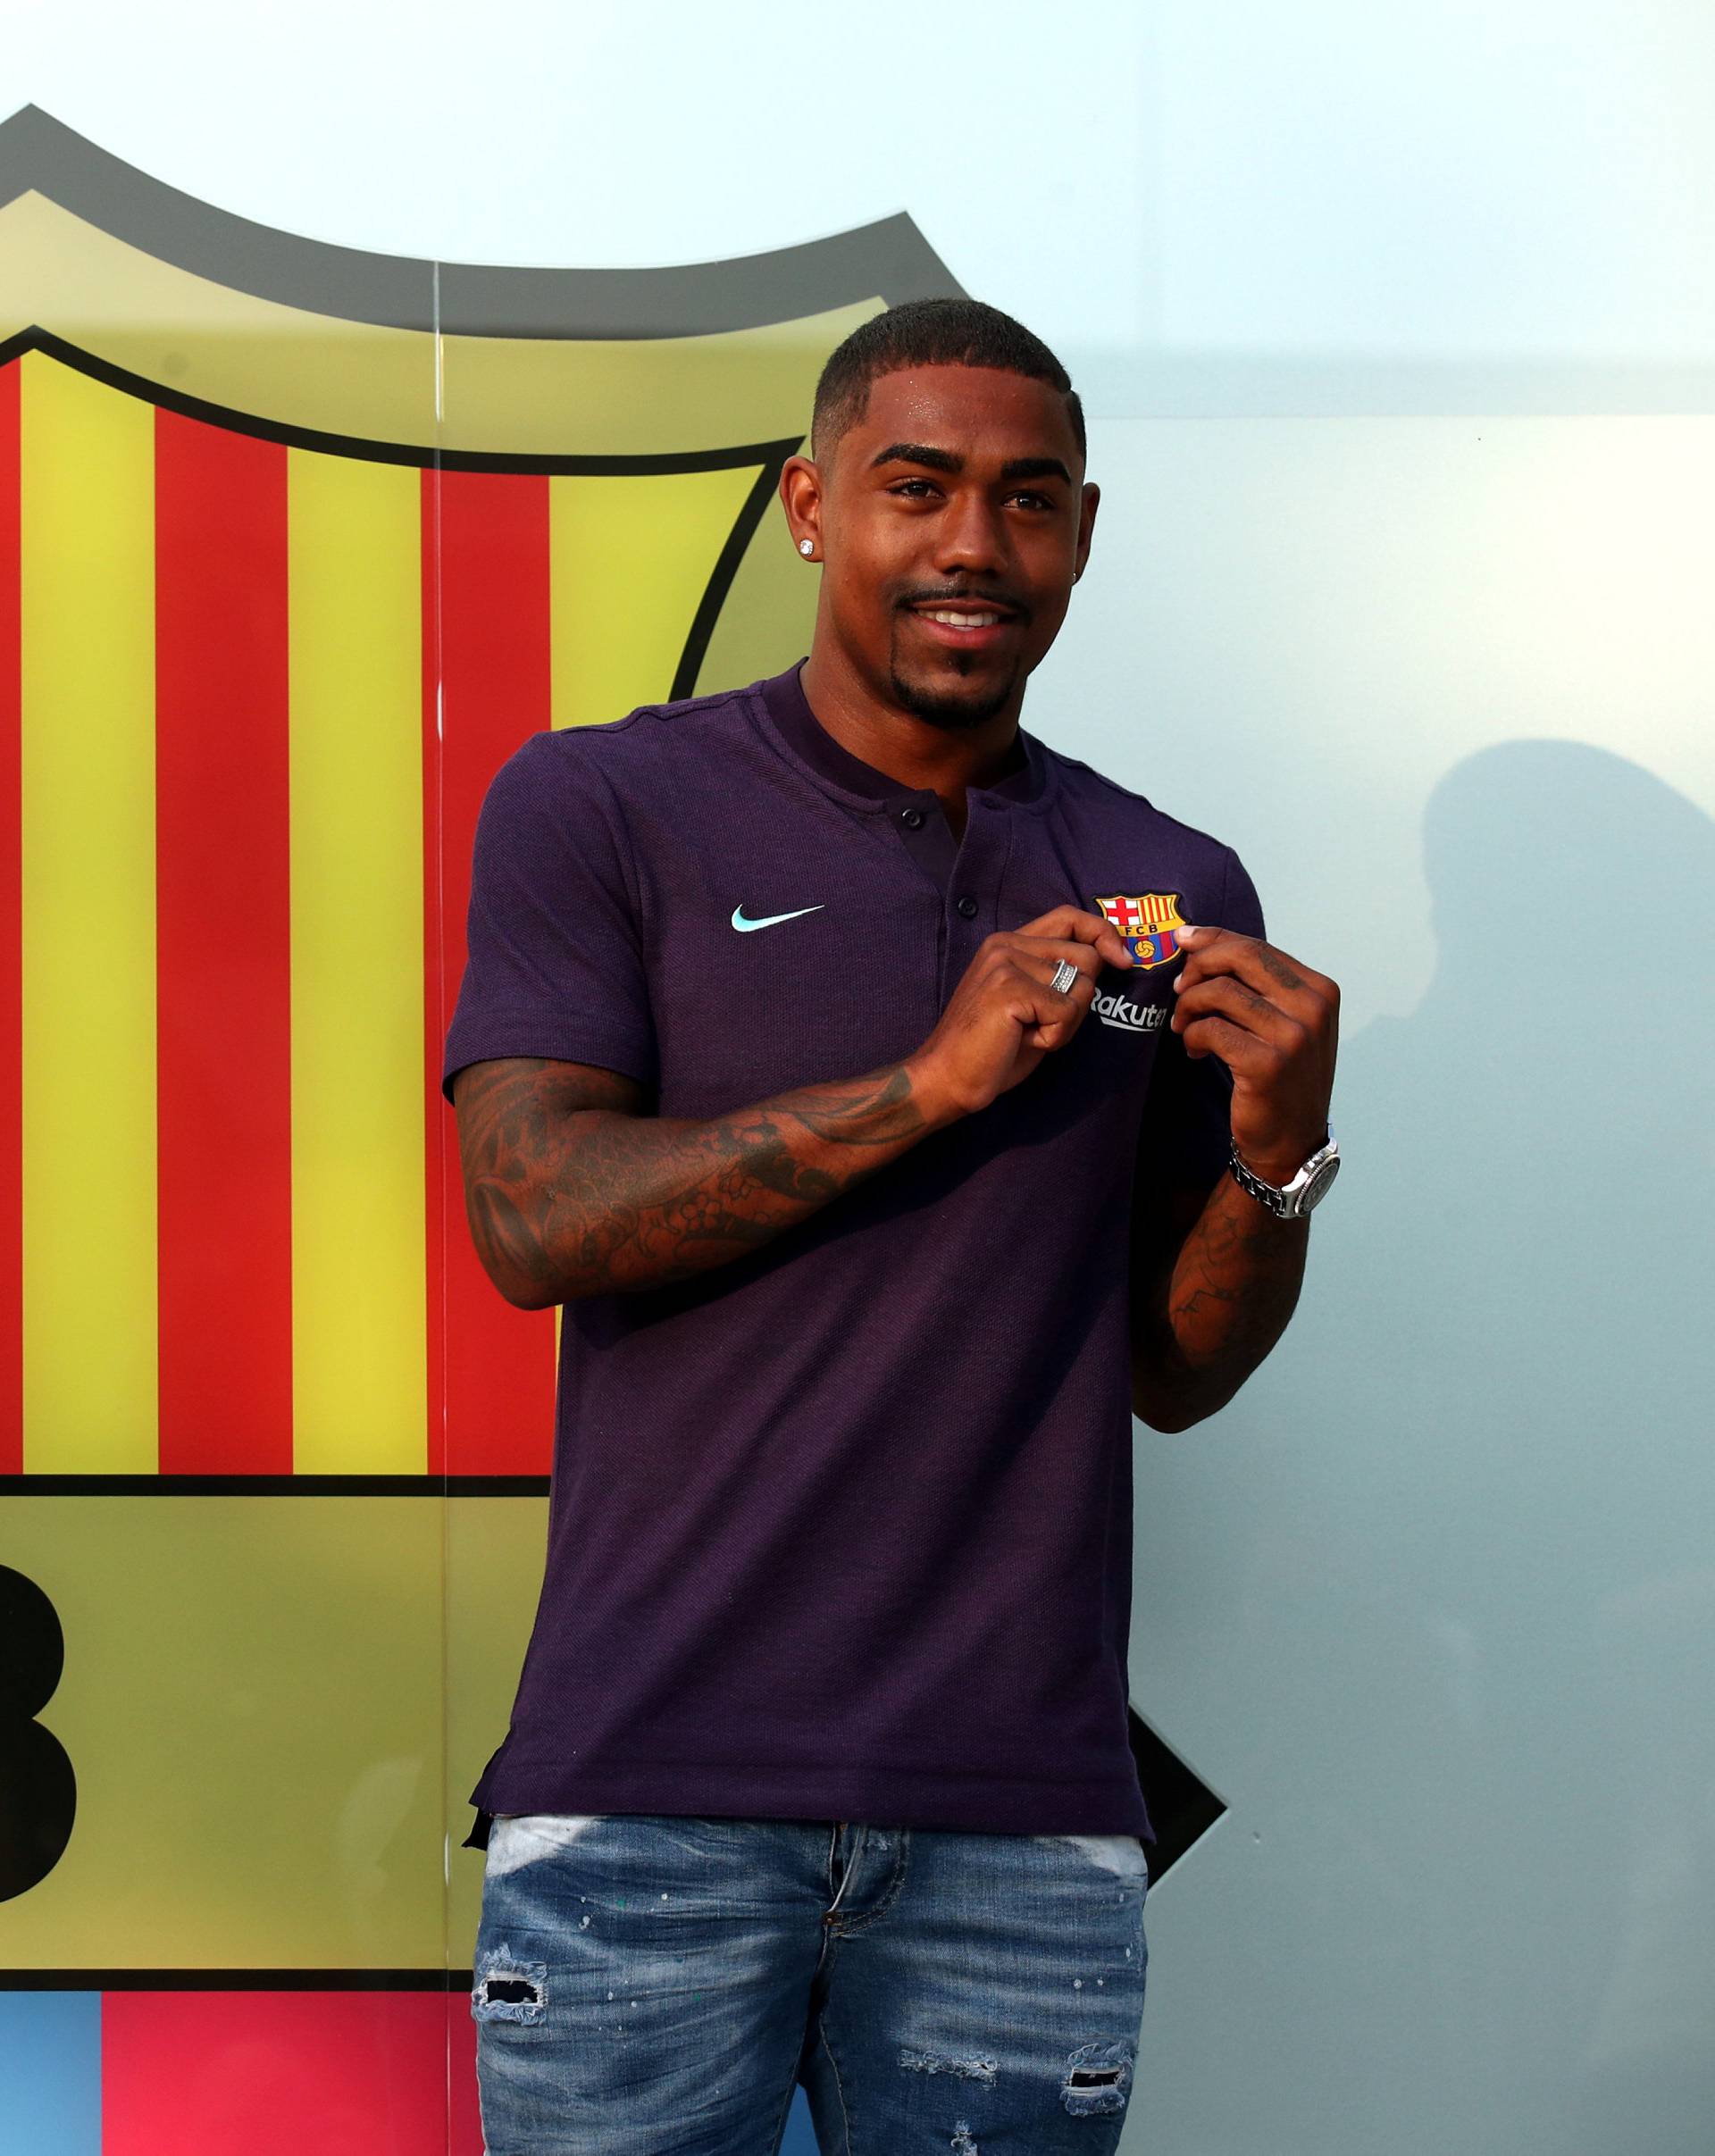 Brazilian soccer player Malcom Filipe Silva de Oliveira poses in front of a FC Barcelona logo at their offices next to Camp Nou stadium in Barcelona